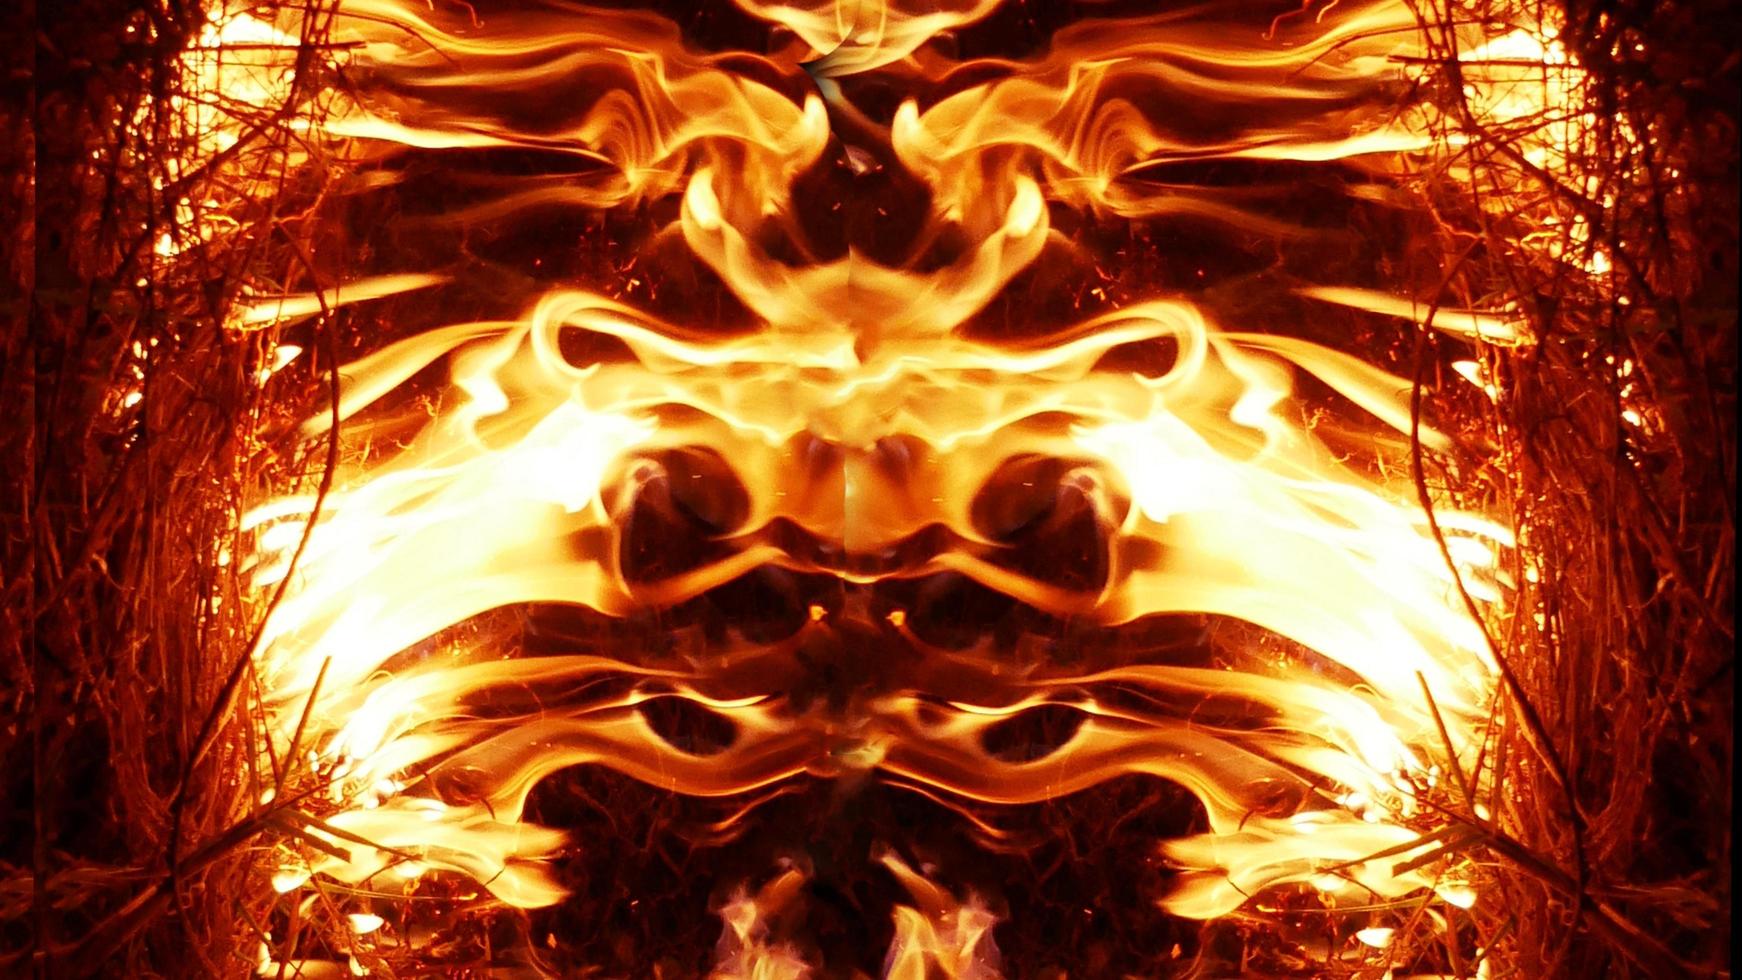 A beautiful flame shaped as imagined. like from hell, showing a dangerous and fiery fervor, black background. photo